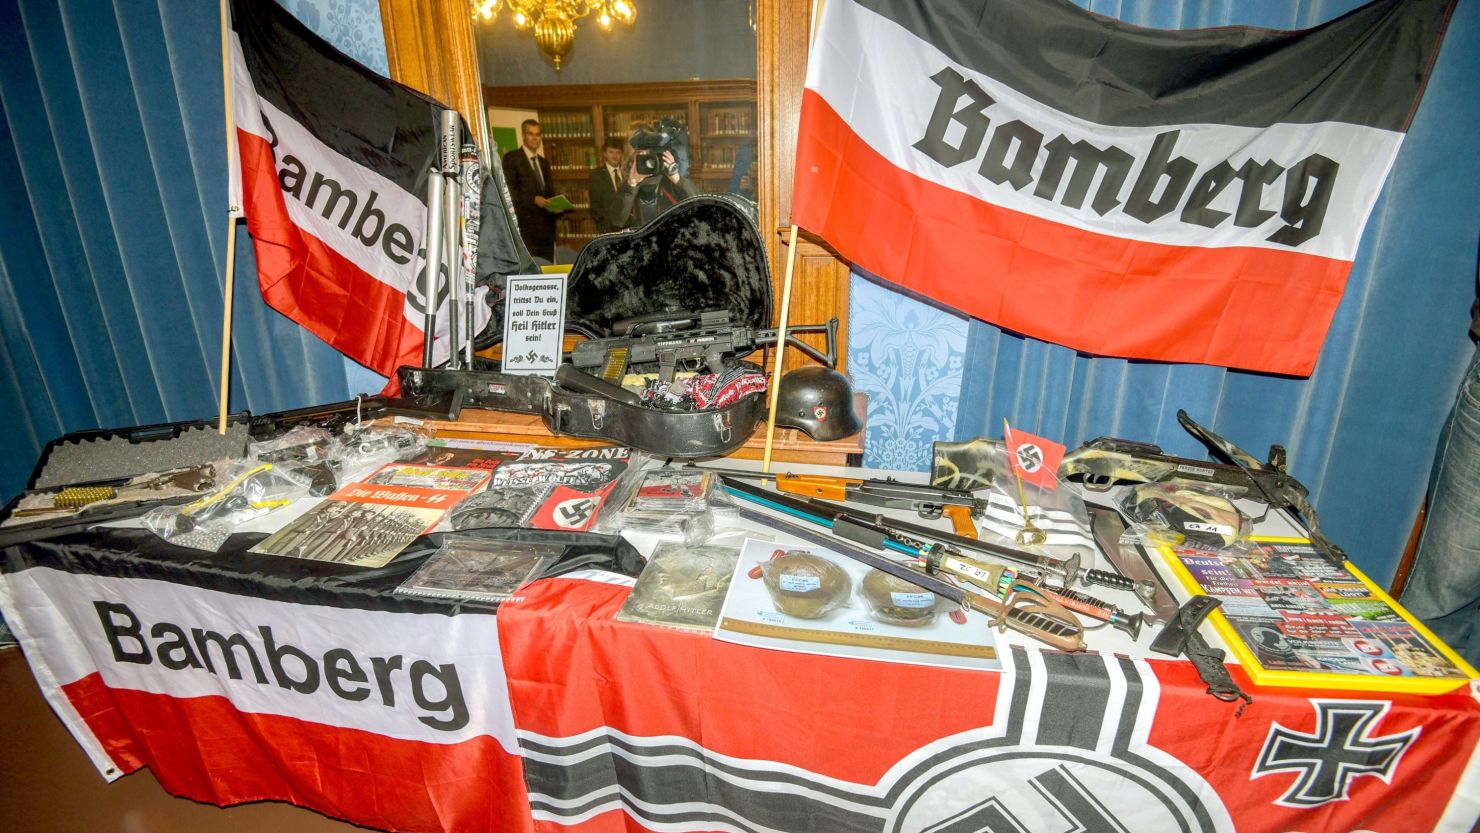 Seized firearms, other weapons, paintball guns and Nazi flags on display during a press conference of German police in Bamberg, southern Germany.